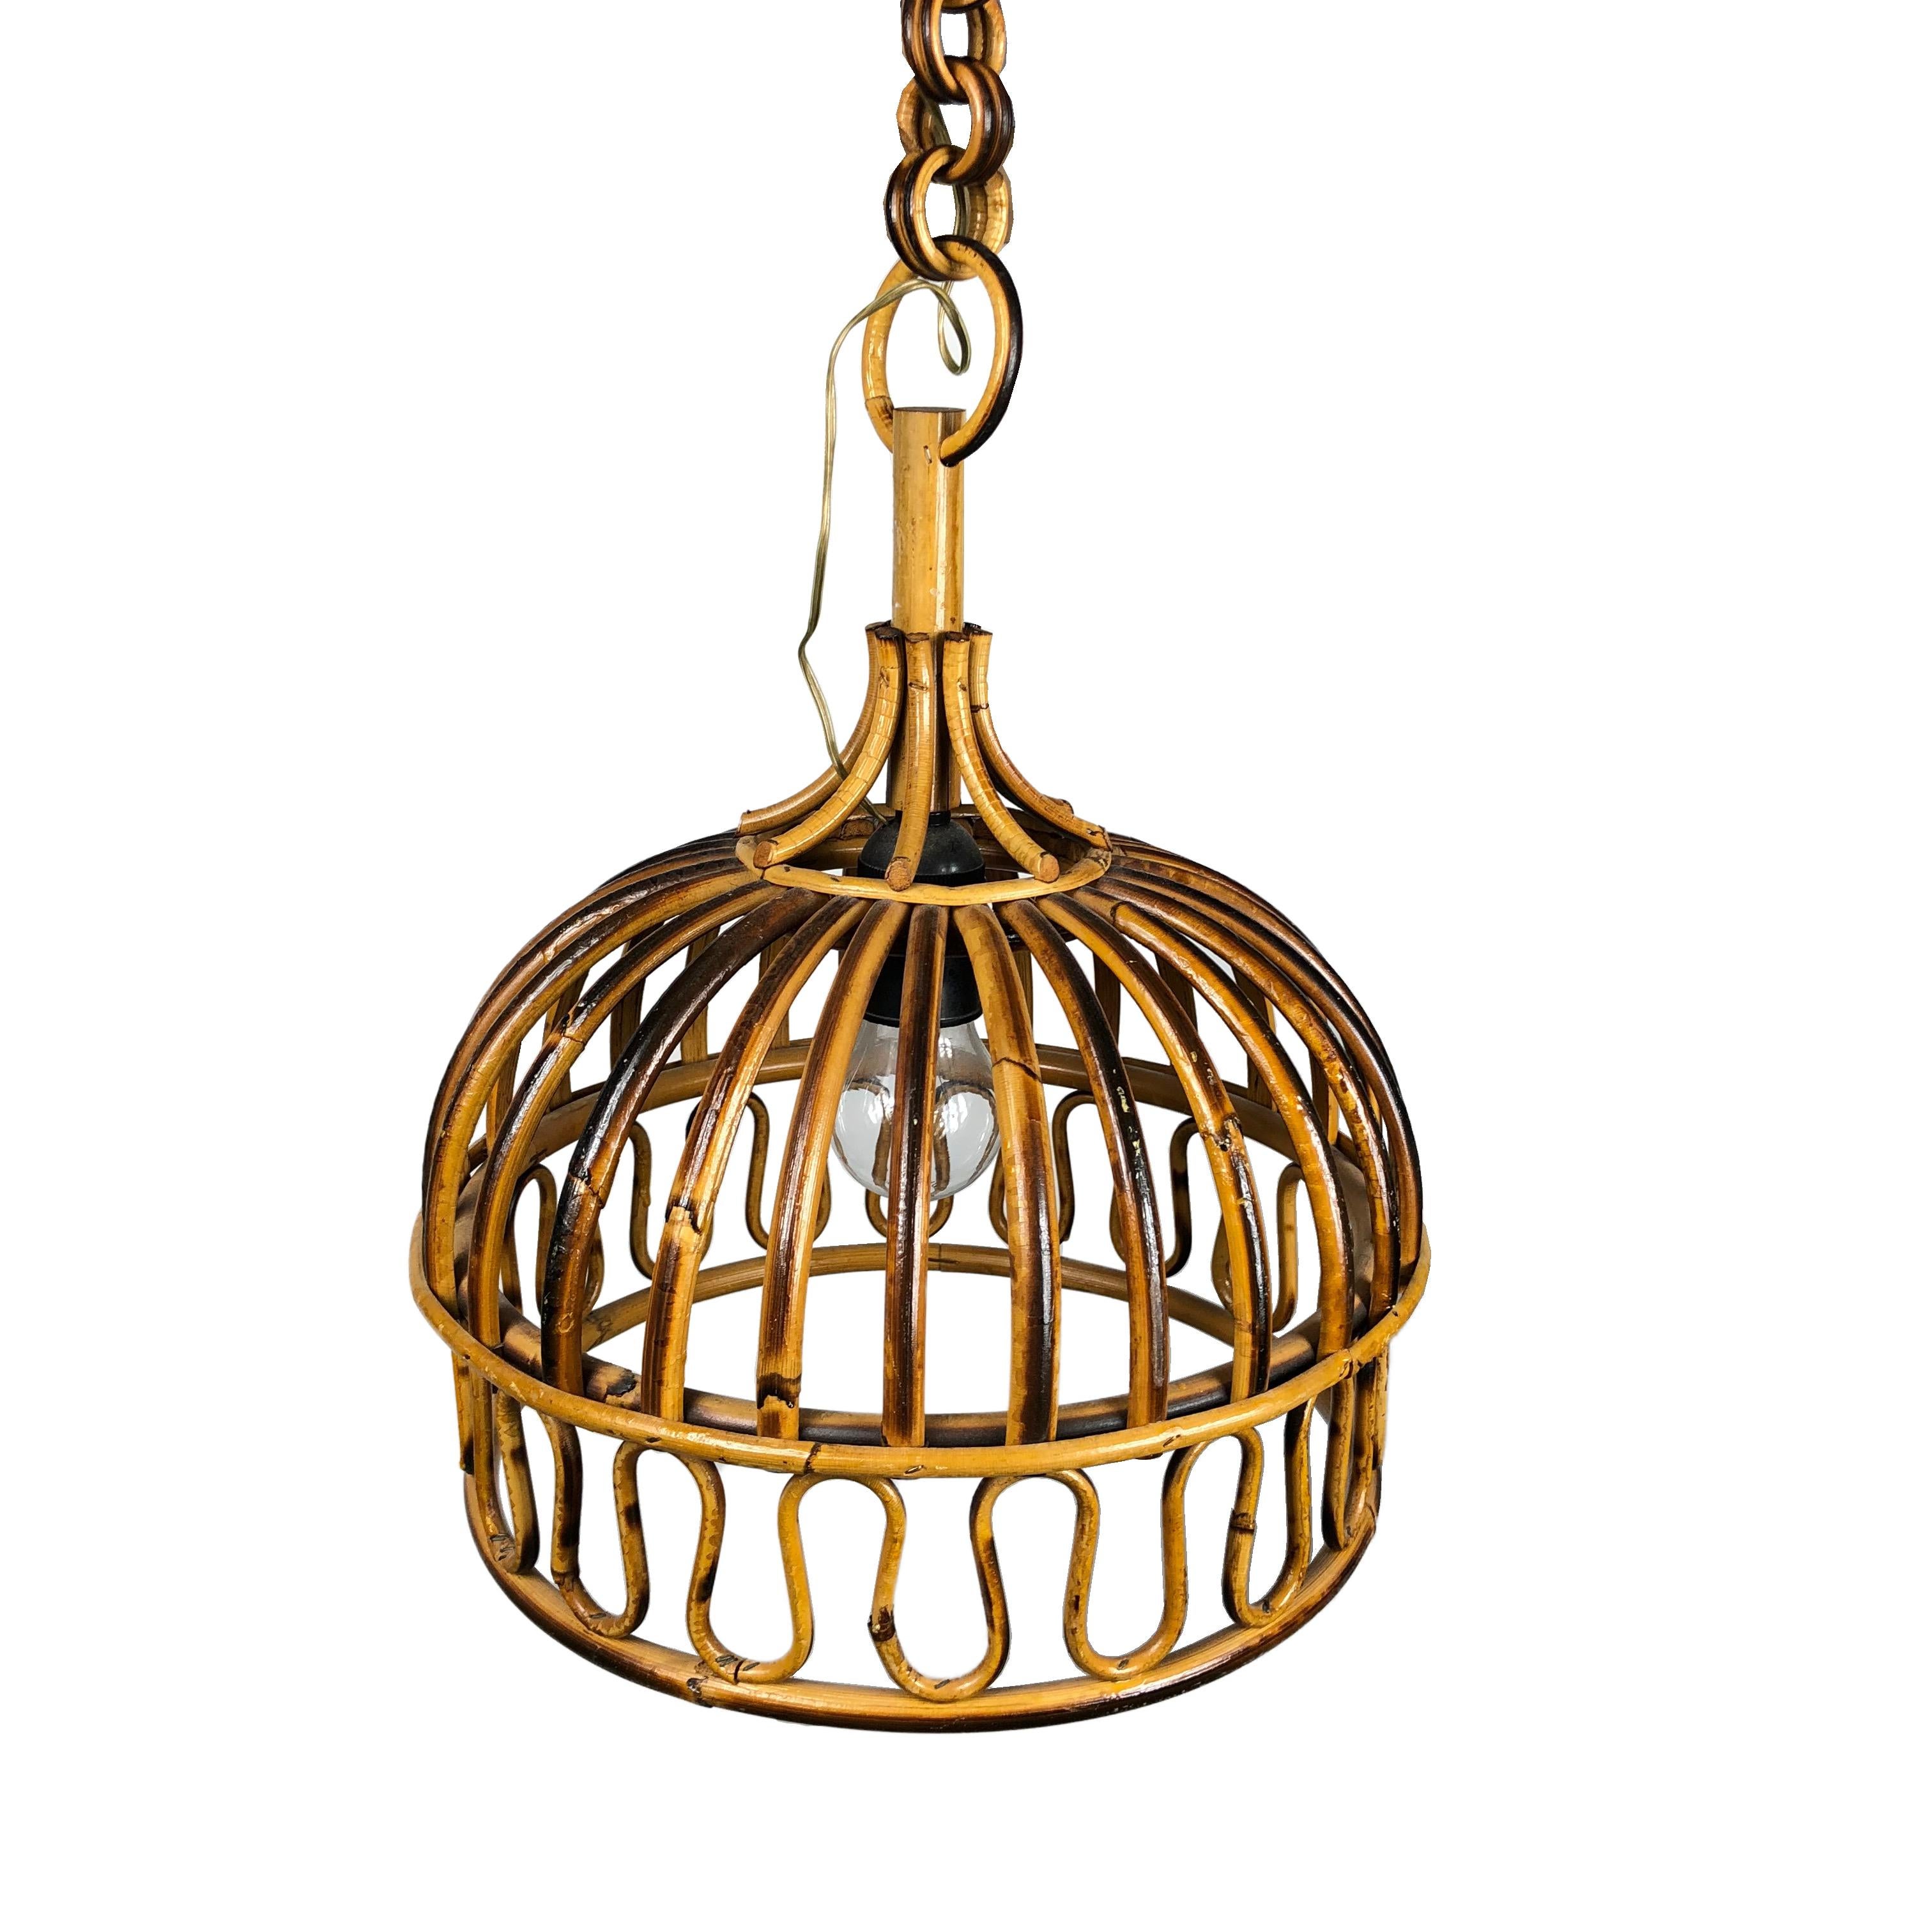 Mid-Century Modern Franco Albini, Rattan Bell Shaped Pendant, French Riviera Style, Italy, 1960s